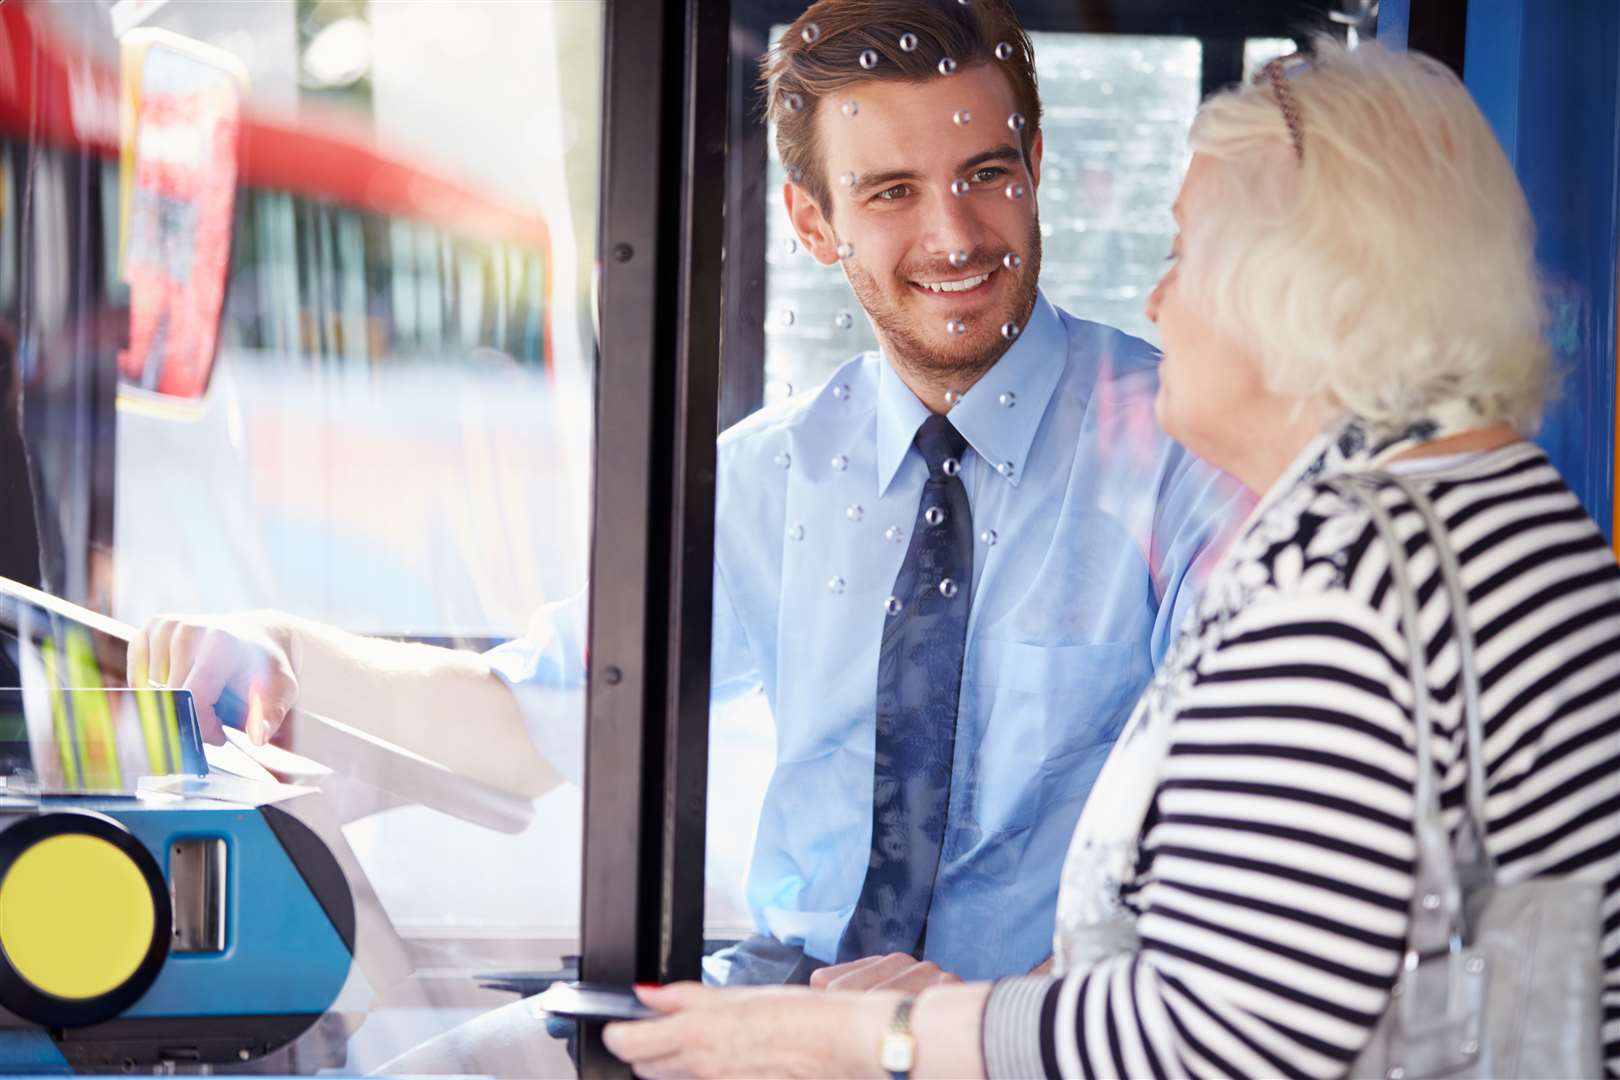 More than 130 bus operators in England are signed up the scheme. Image: iStock.